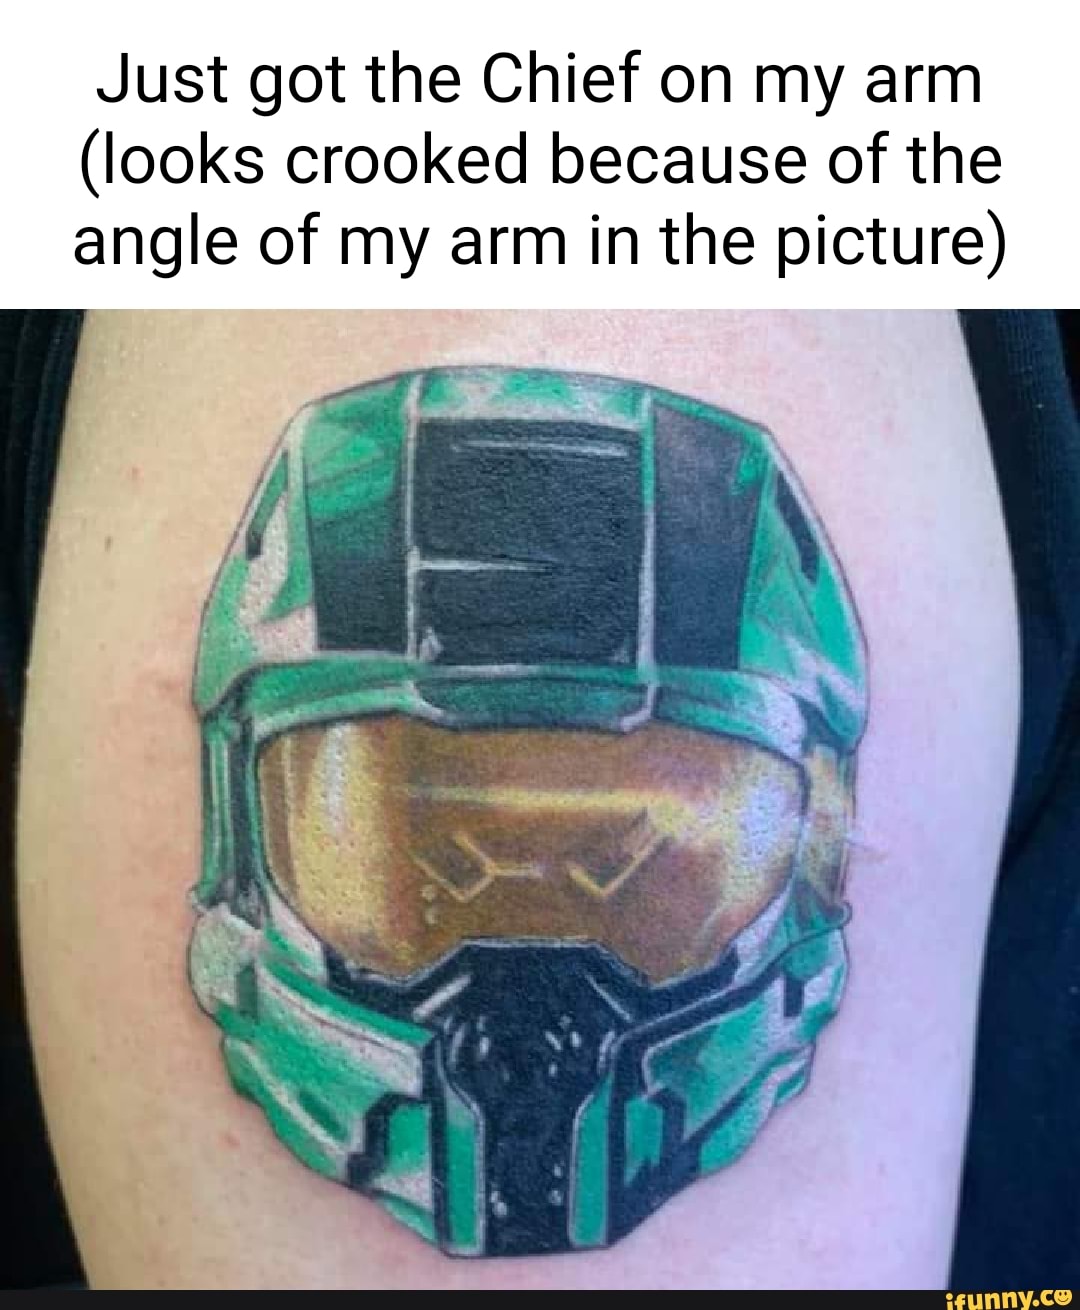 Master Chief from the game Halo 